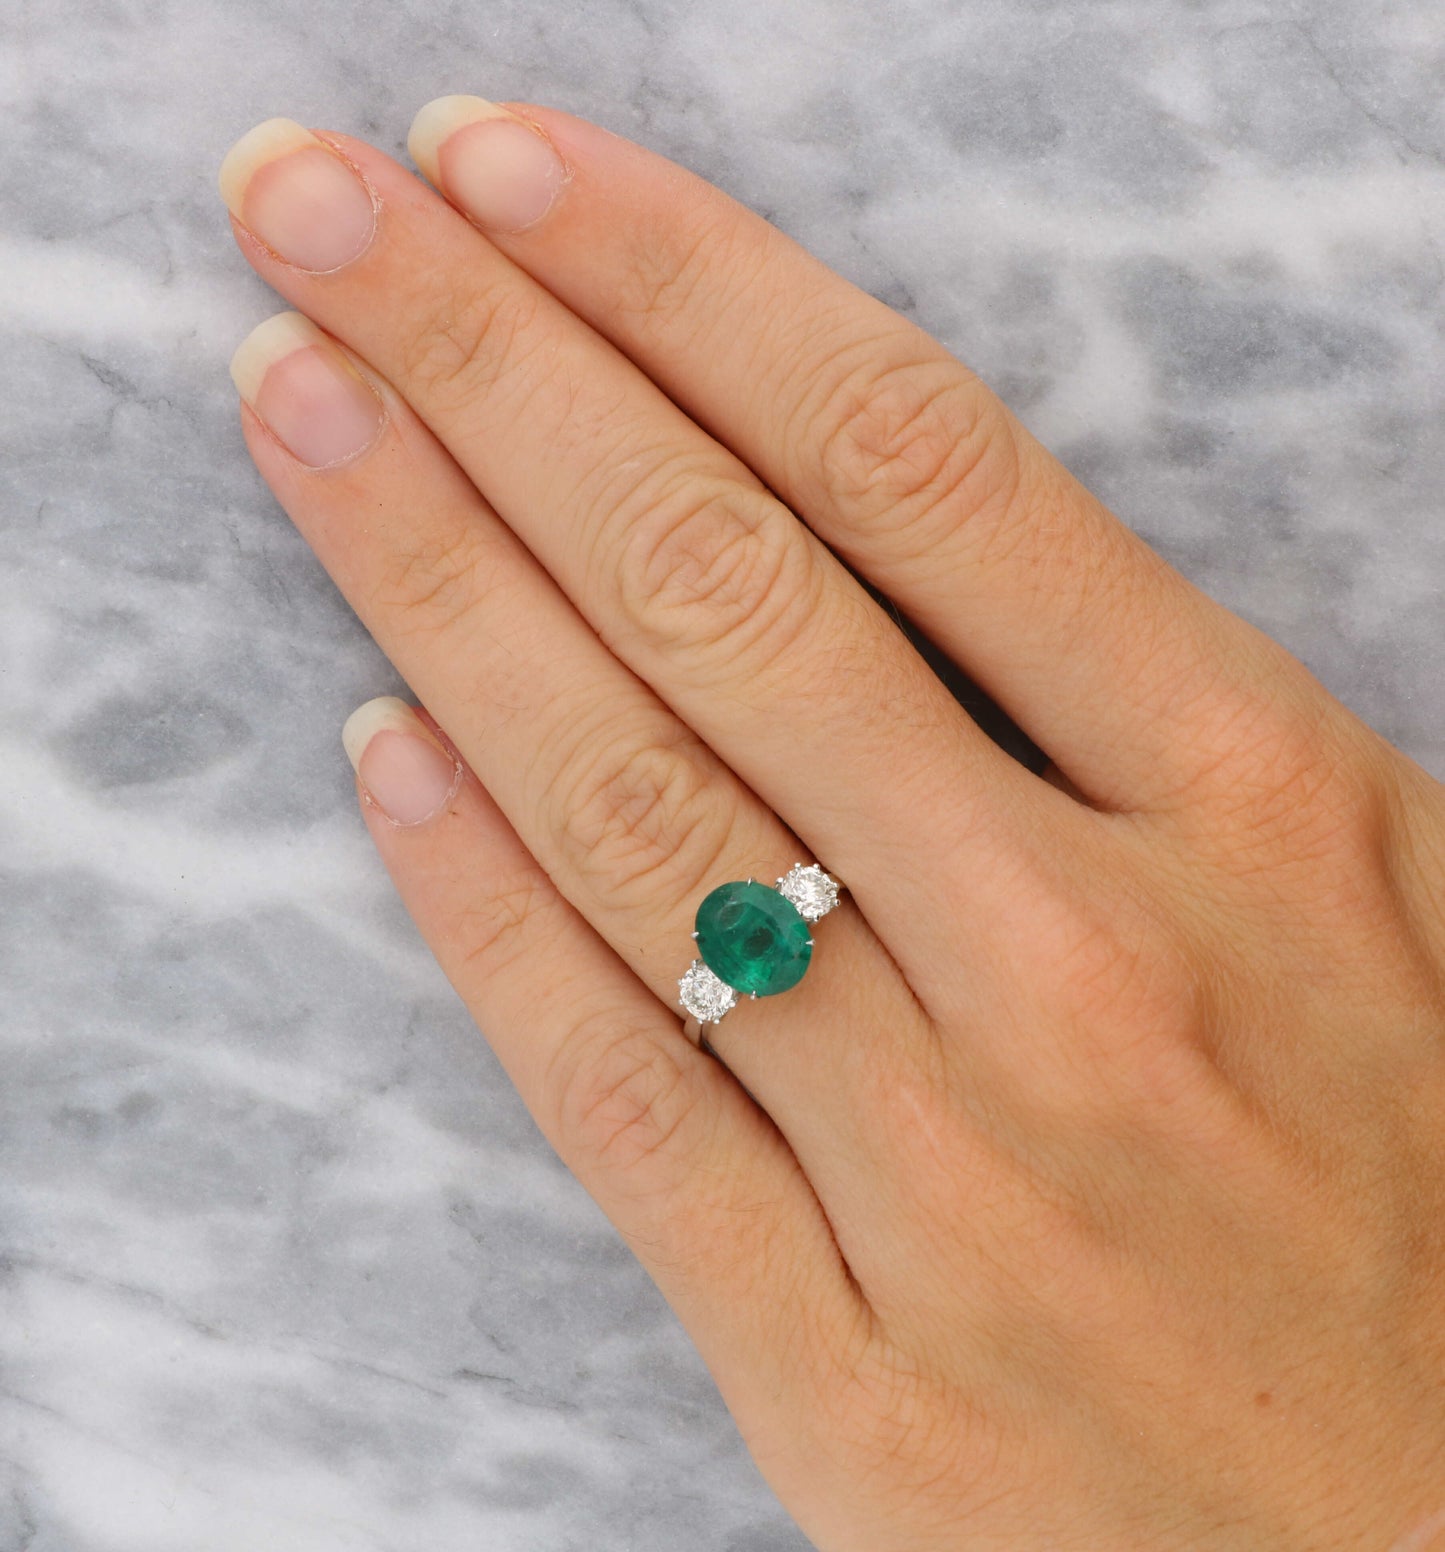 18ct emerald and diamond 3 stone engagement ring